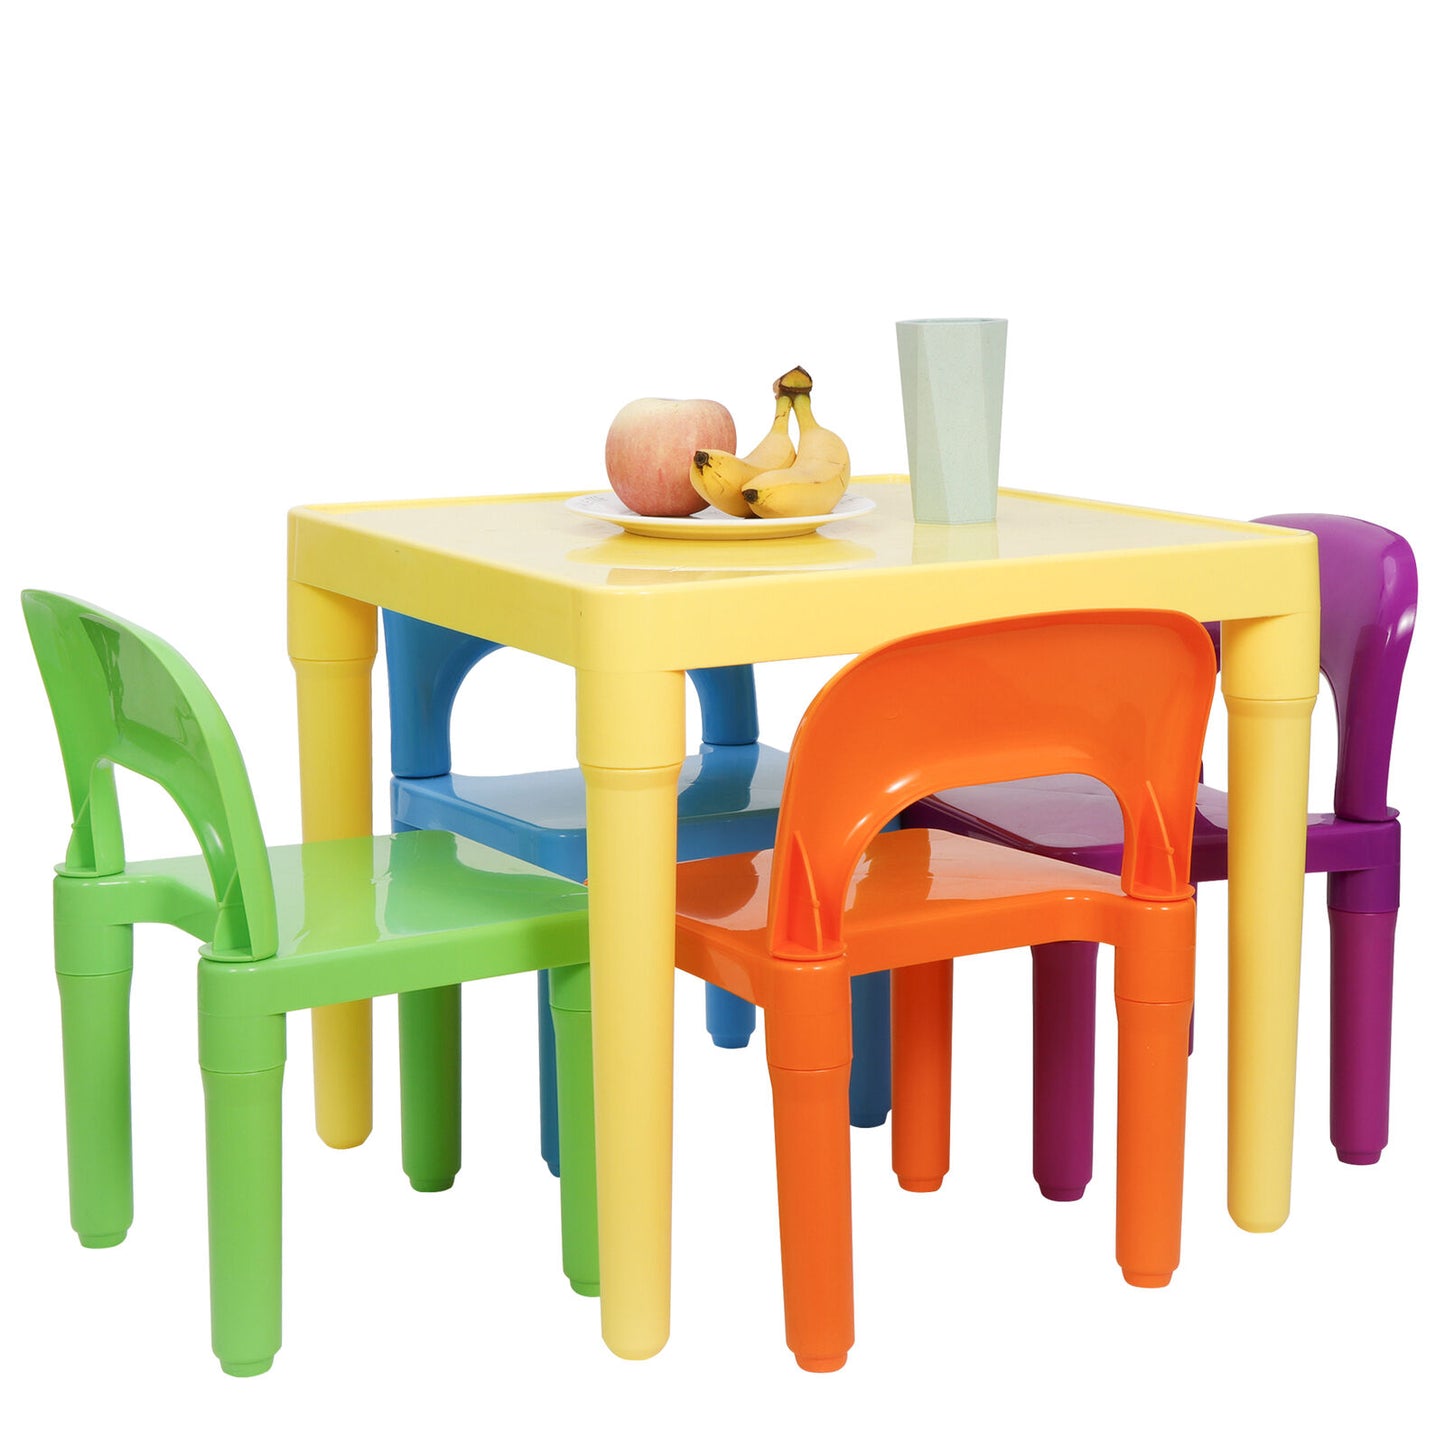 KidsTable  4 Chair Play Build Table Set for Indoor Activity Outdoor Water Play